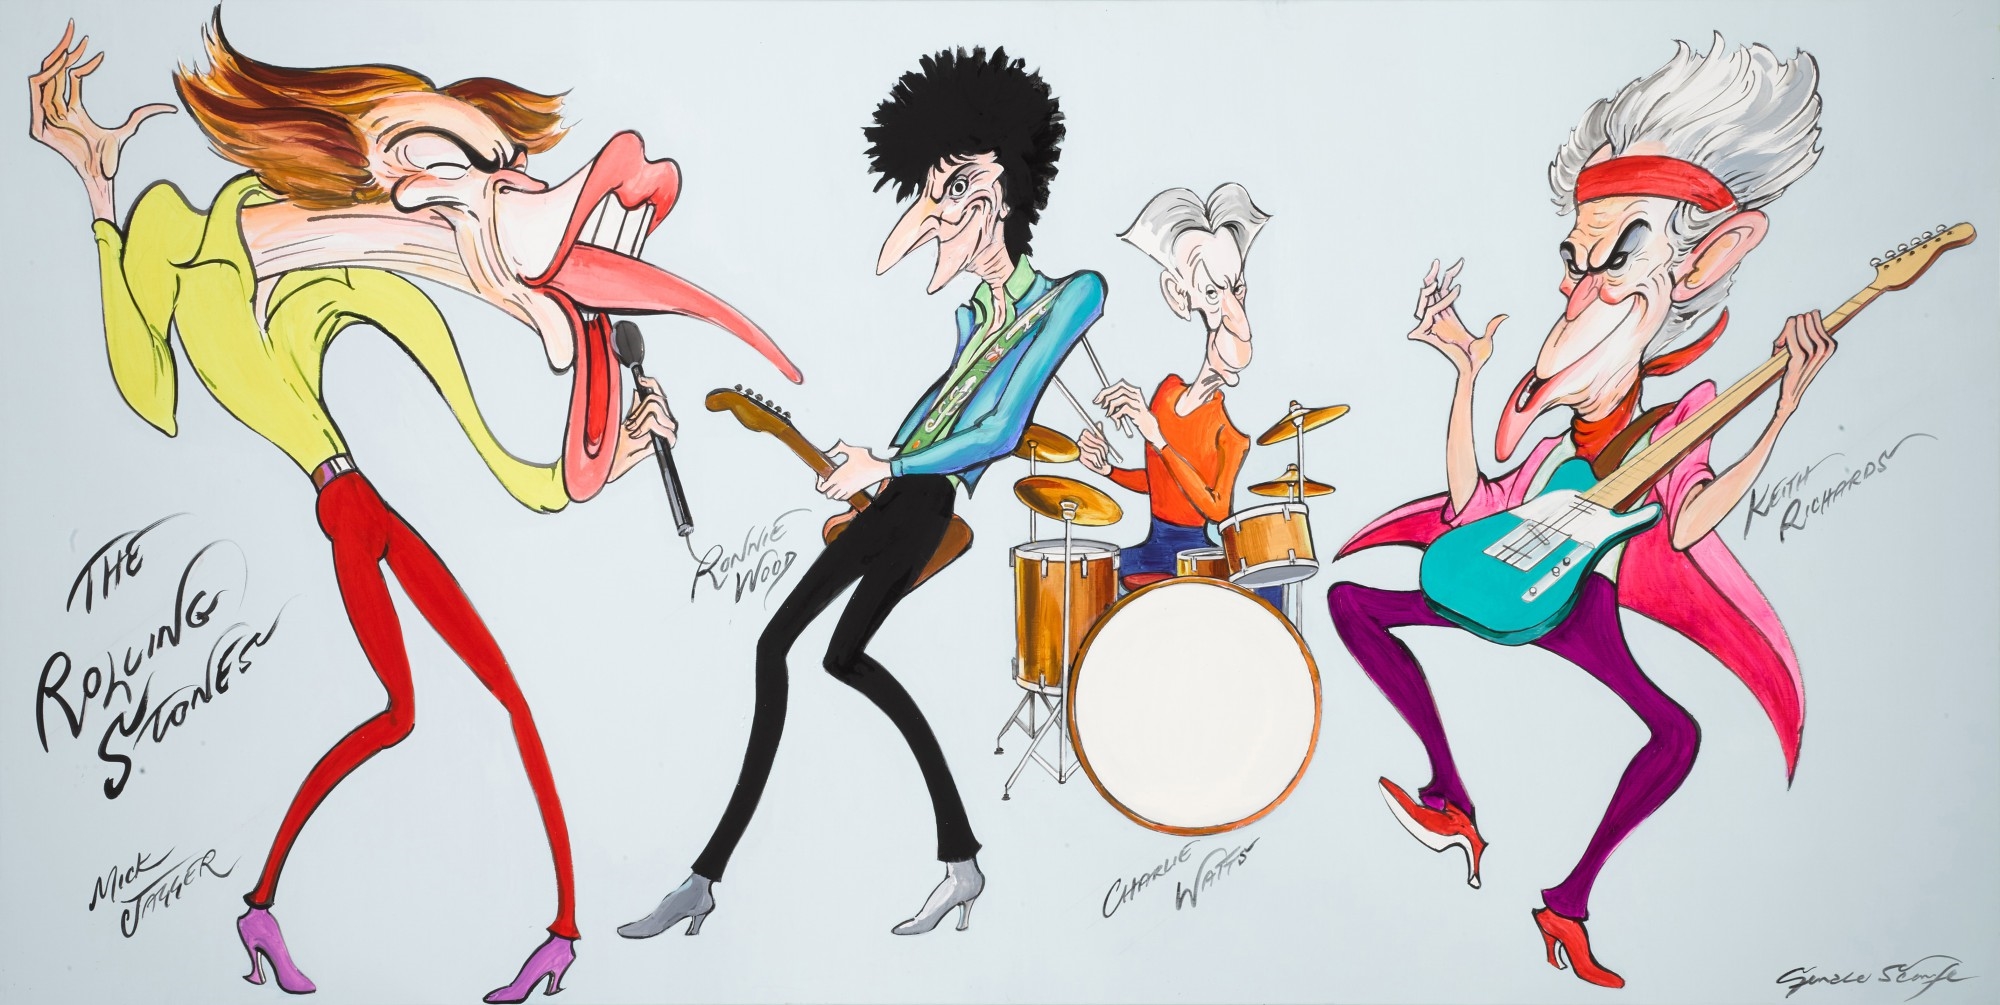 The Rolling Stones by Gerald Scarfe, Executed in 2021